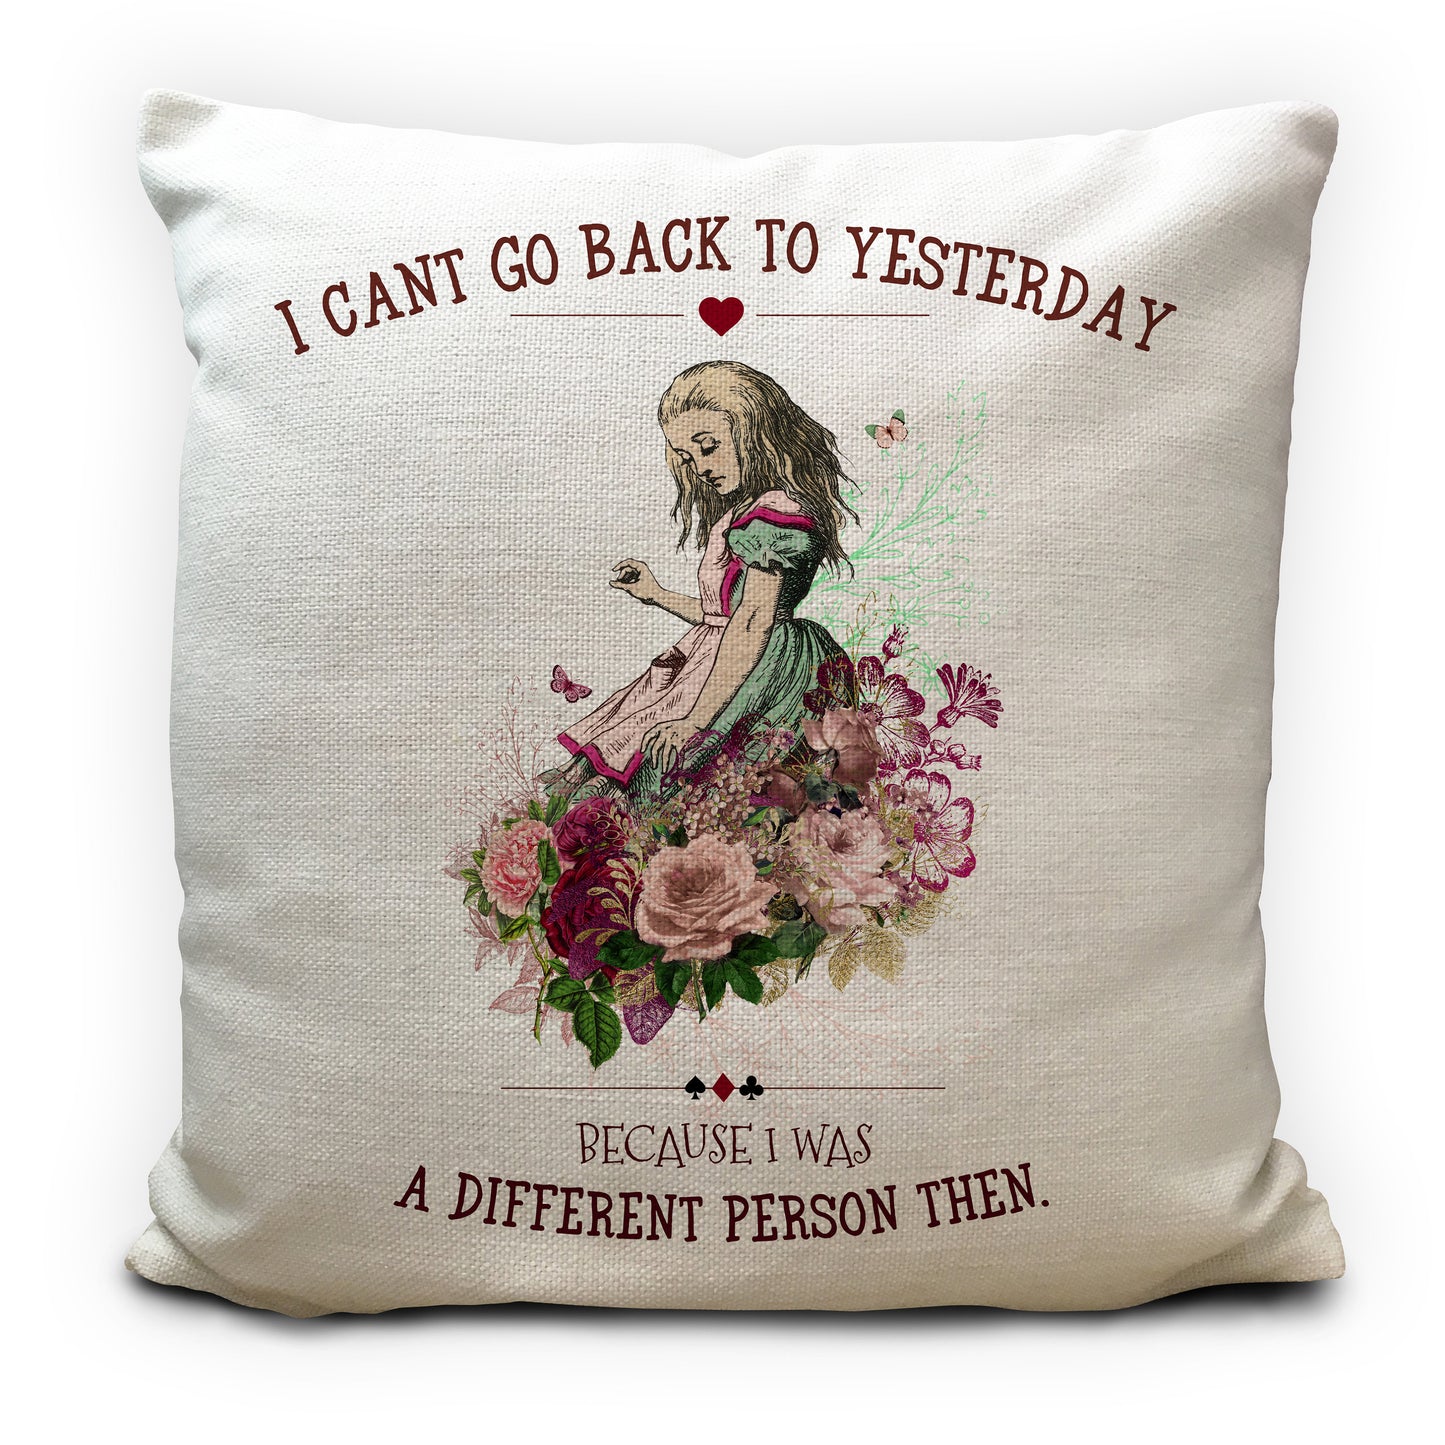 Alice in wonderland cushion cover with pretty illustration and yesterday quote